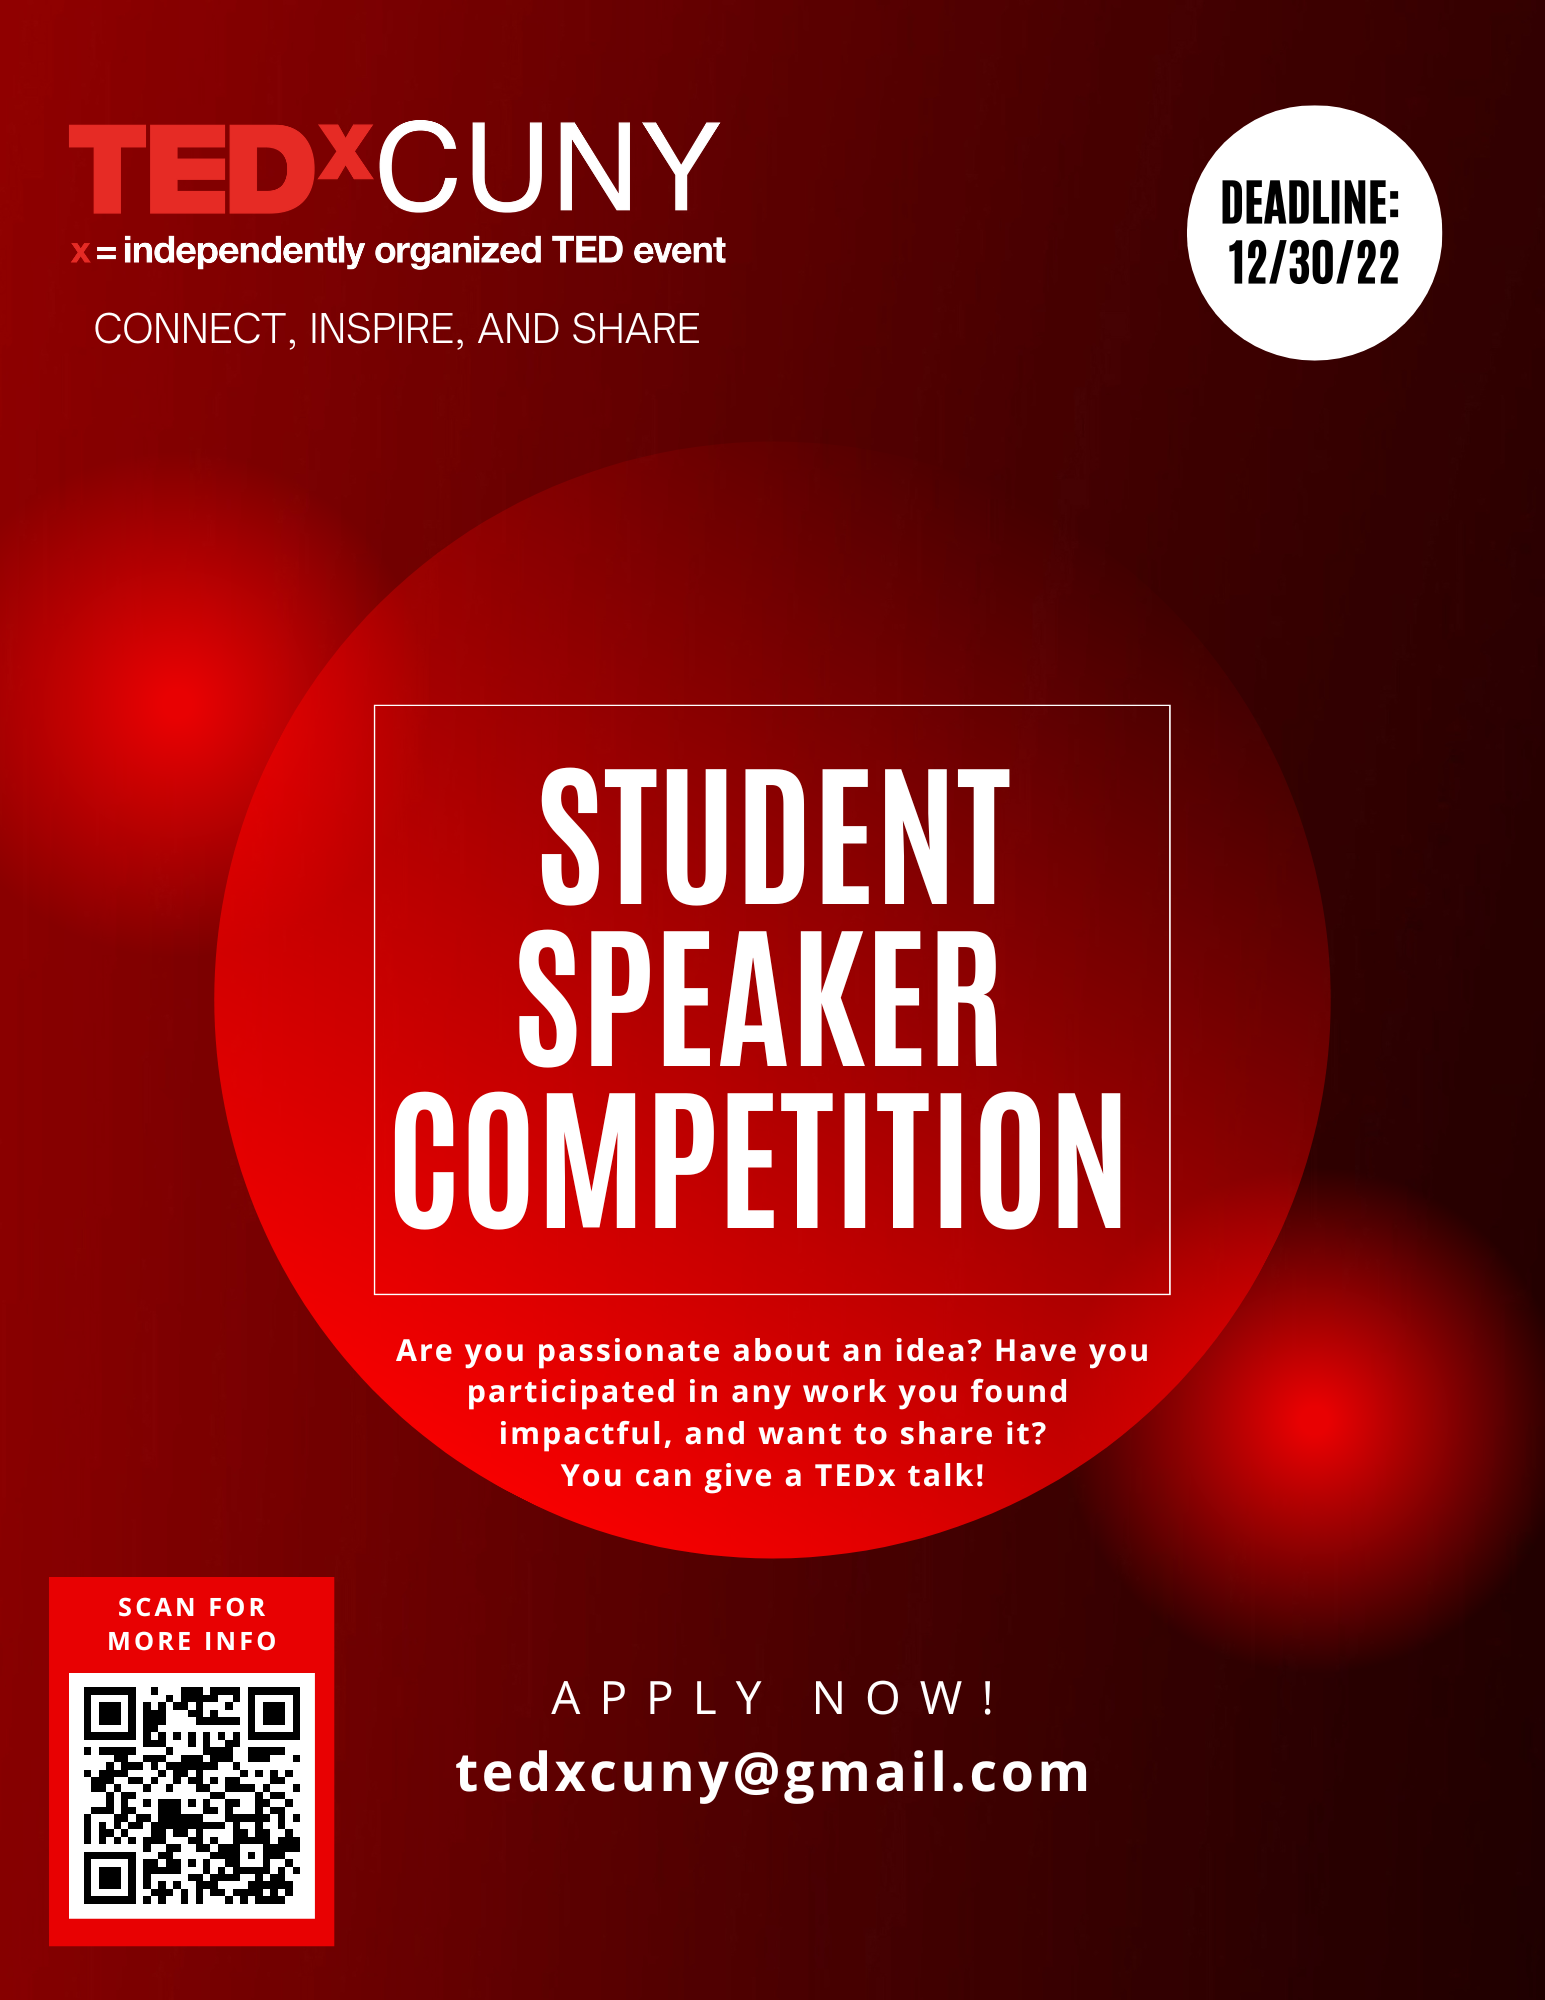 TED x CUNY Student Speaker Competition